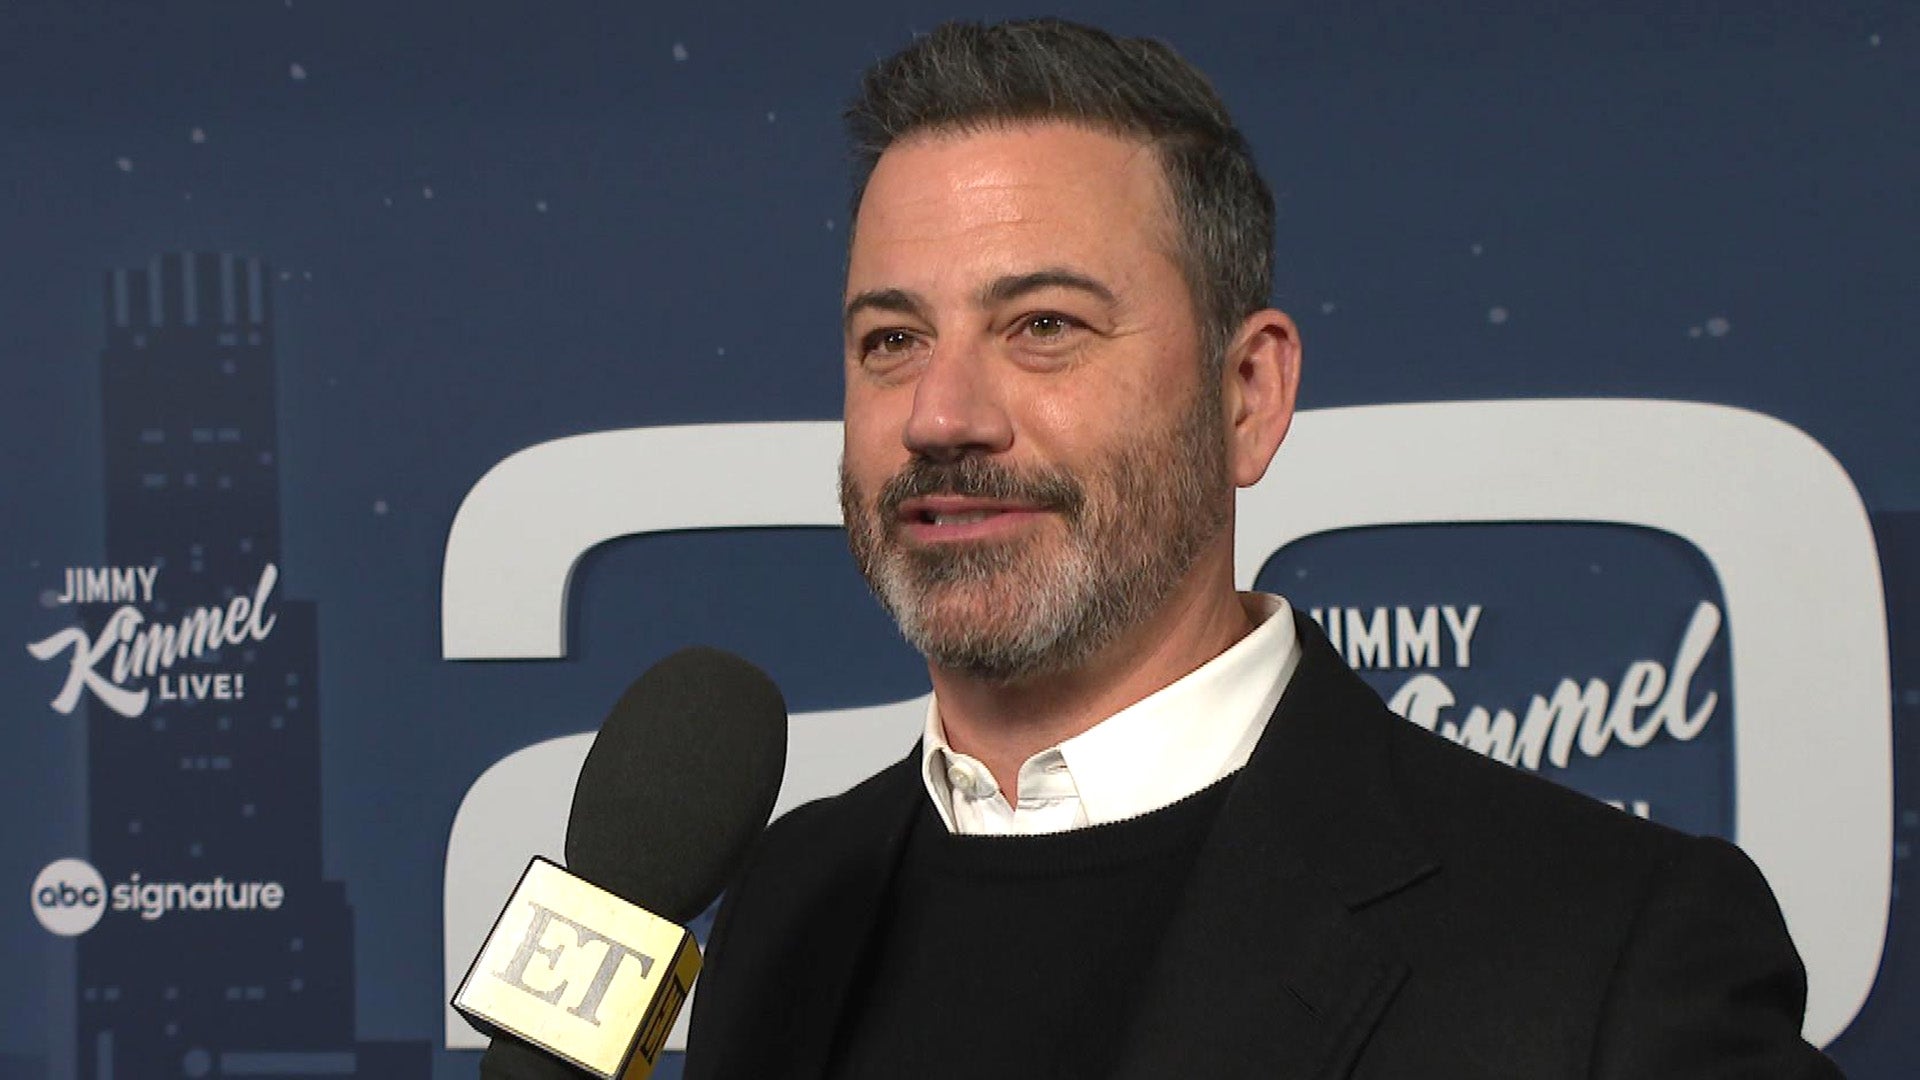 Inside Jimmy Kimmel's Oscar-Hosting Preps and Plan to Avoid Getting Slapped (Exclusive)